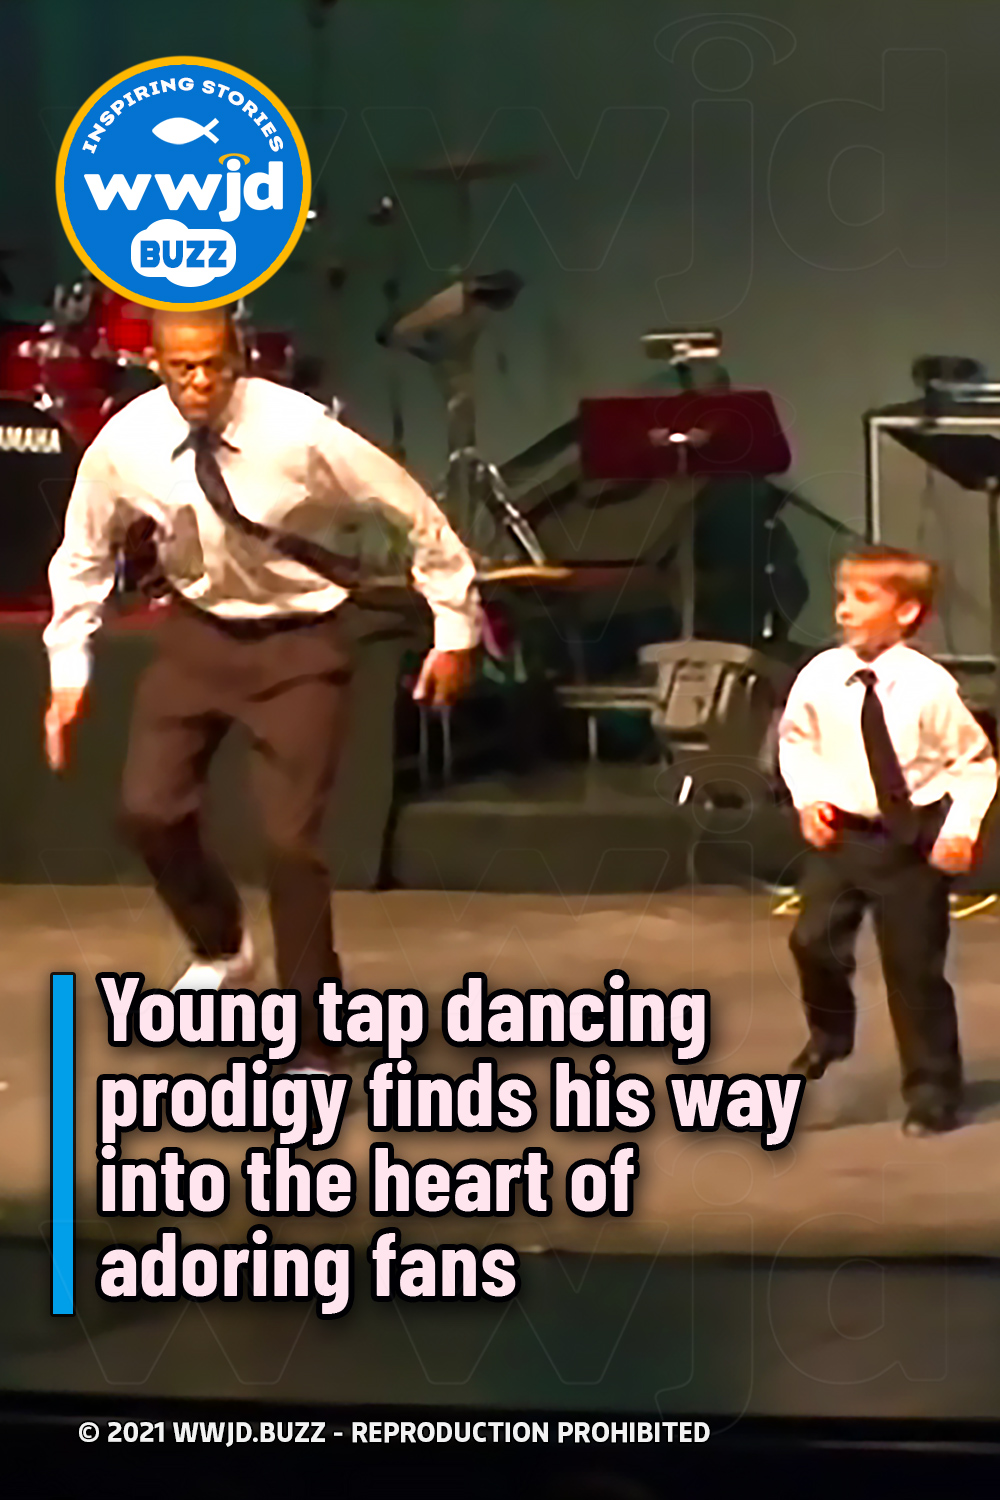 Young tap dancing prodigy finds his way into the heart of adoring fans